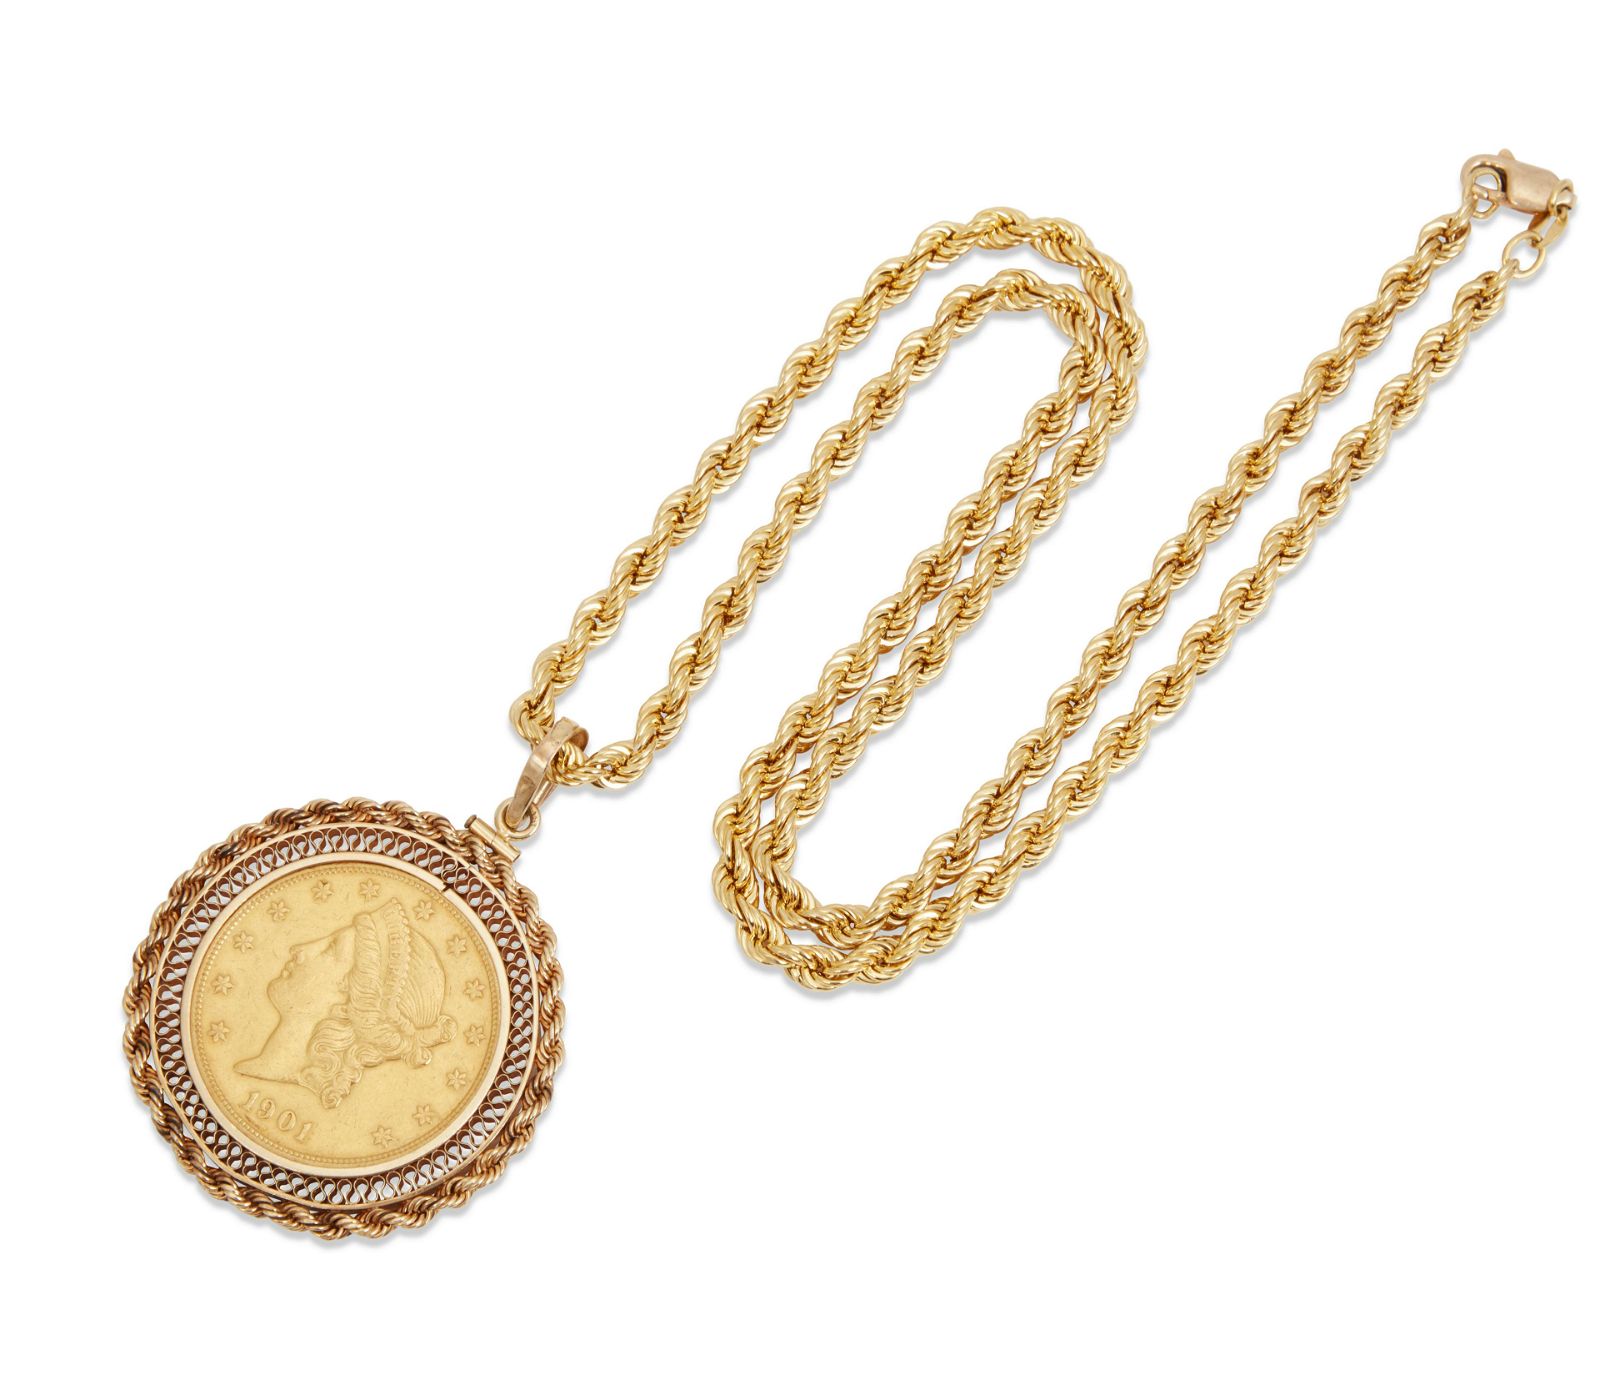 AN AMERICAN GOLD COIN PENDANT AND 2fb25b5